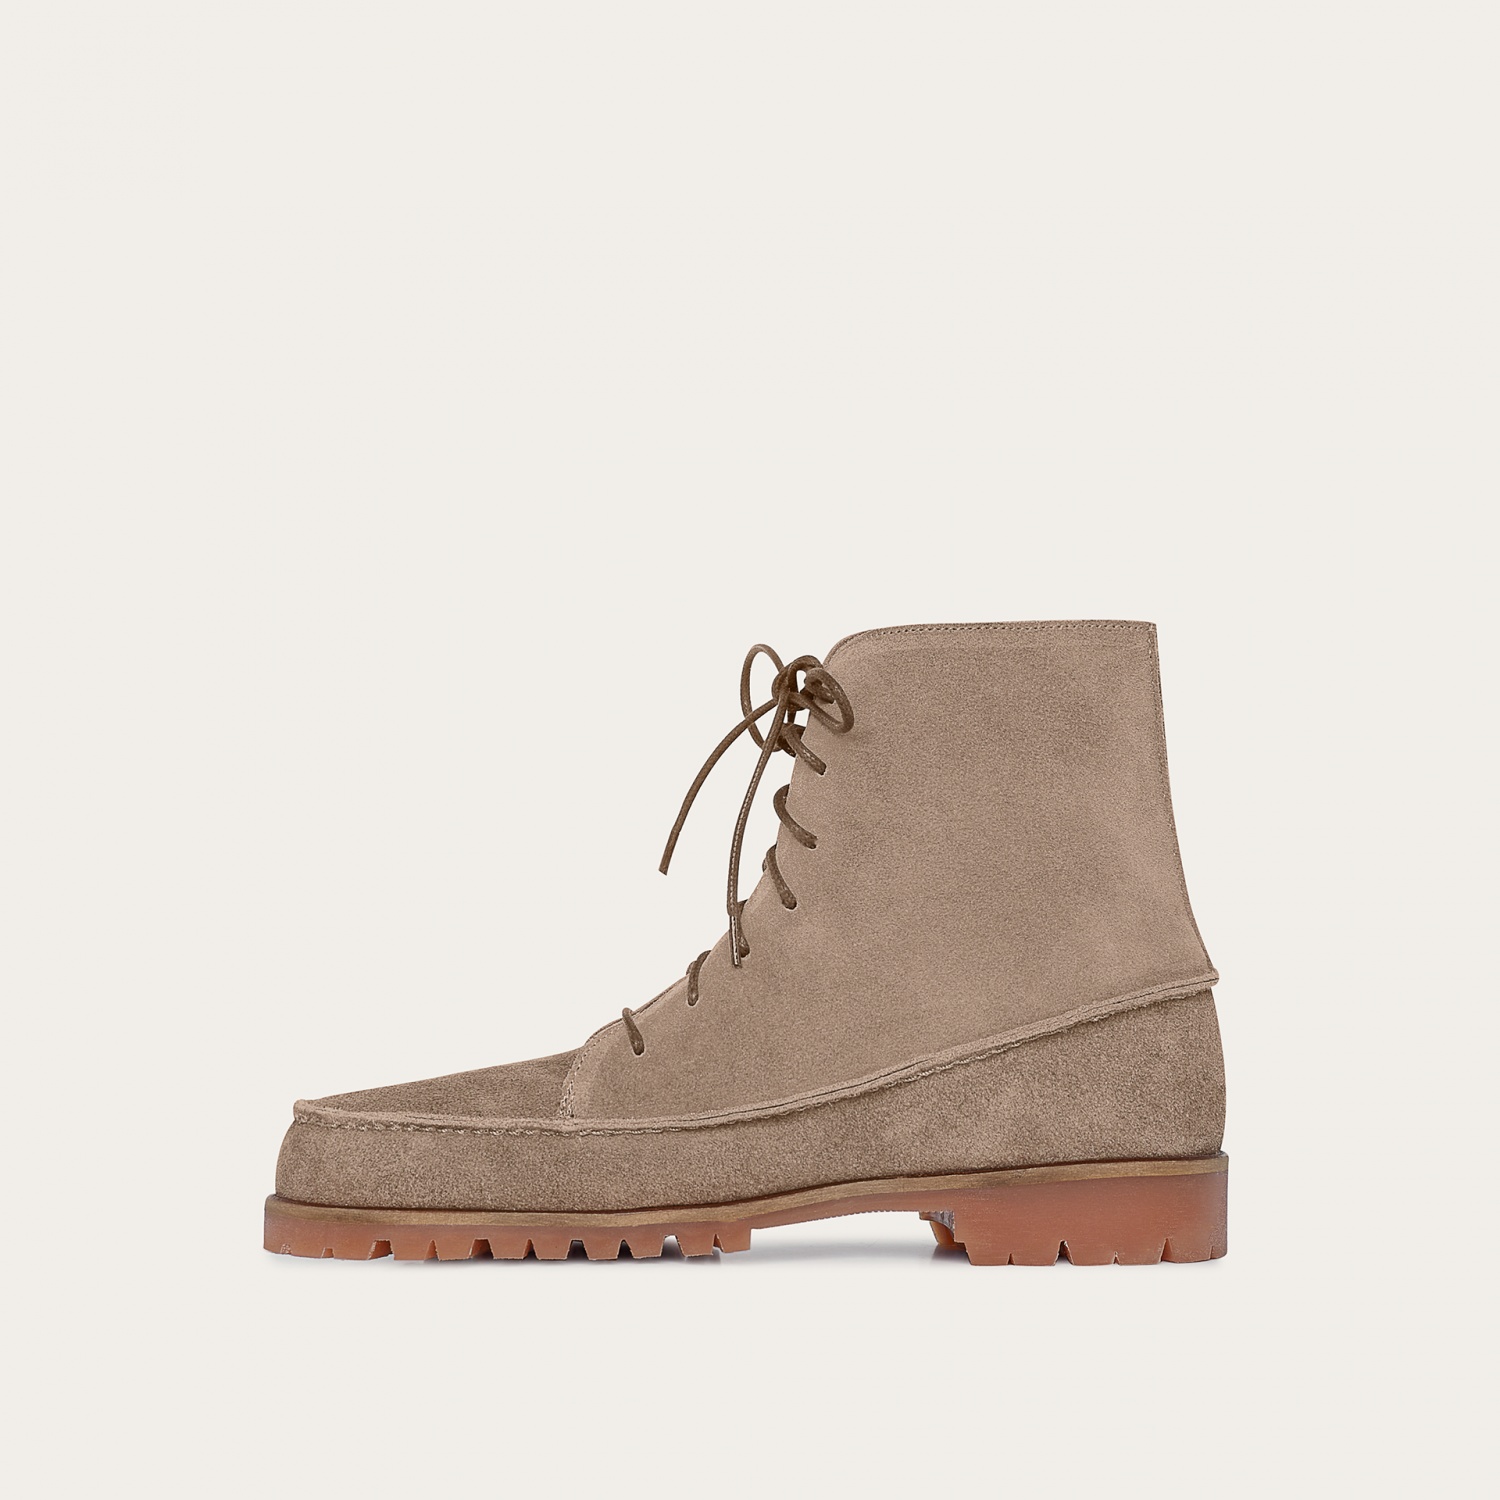  Tefer Boots, grey suede-0 